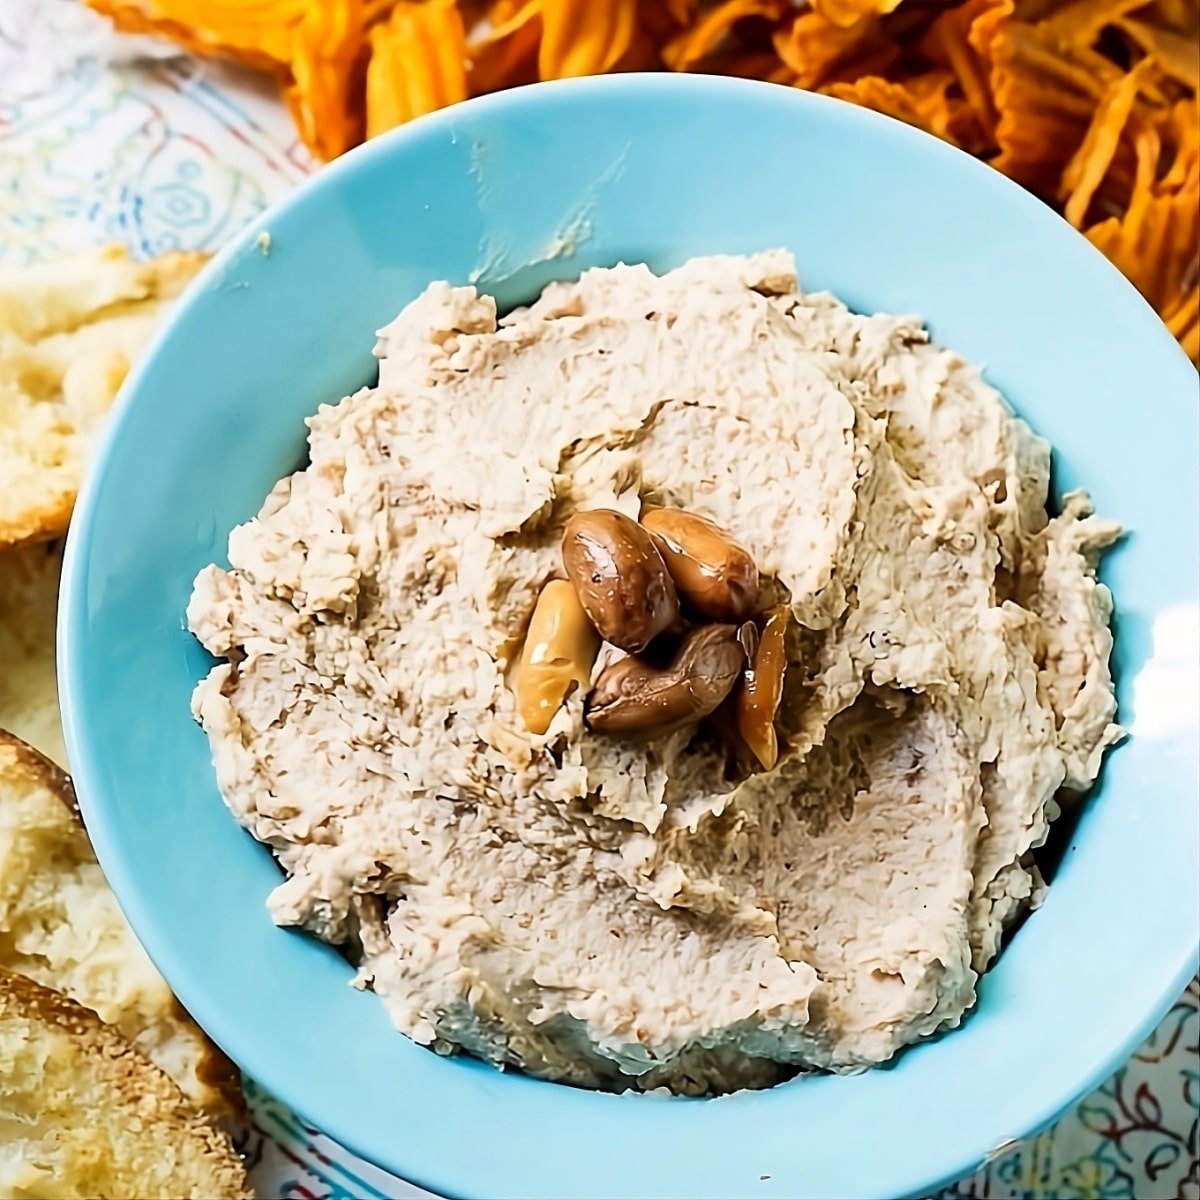 Spicy Boiled Peanut Hummus in blue bowl surrounded by sweet potato chips.